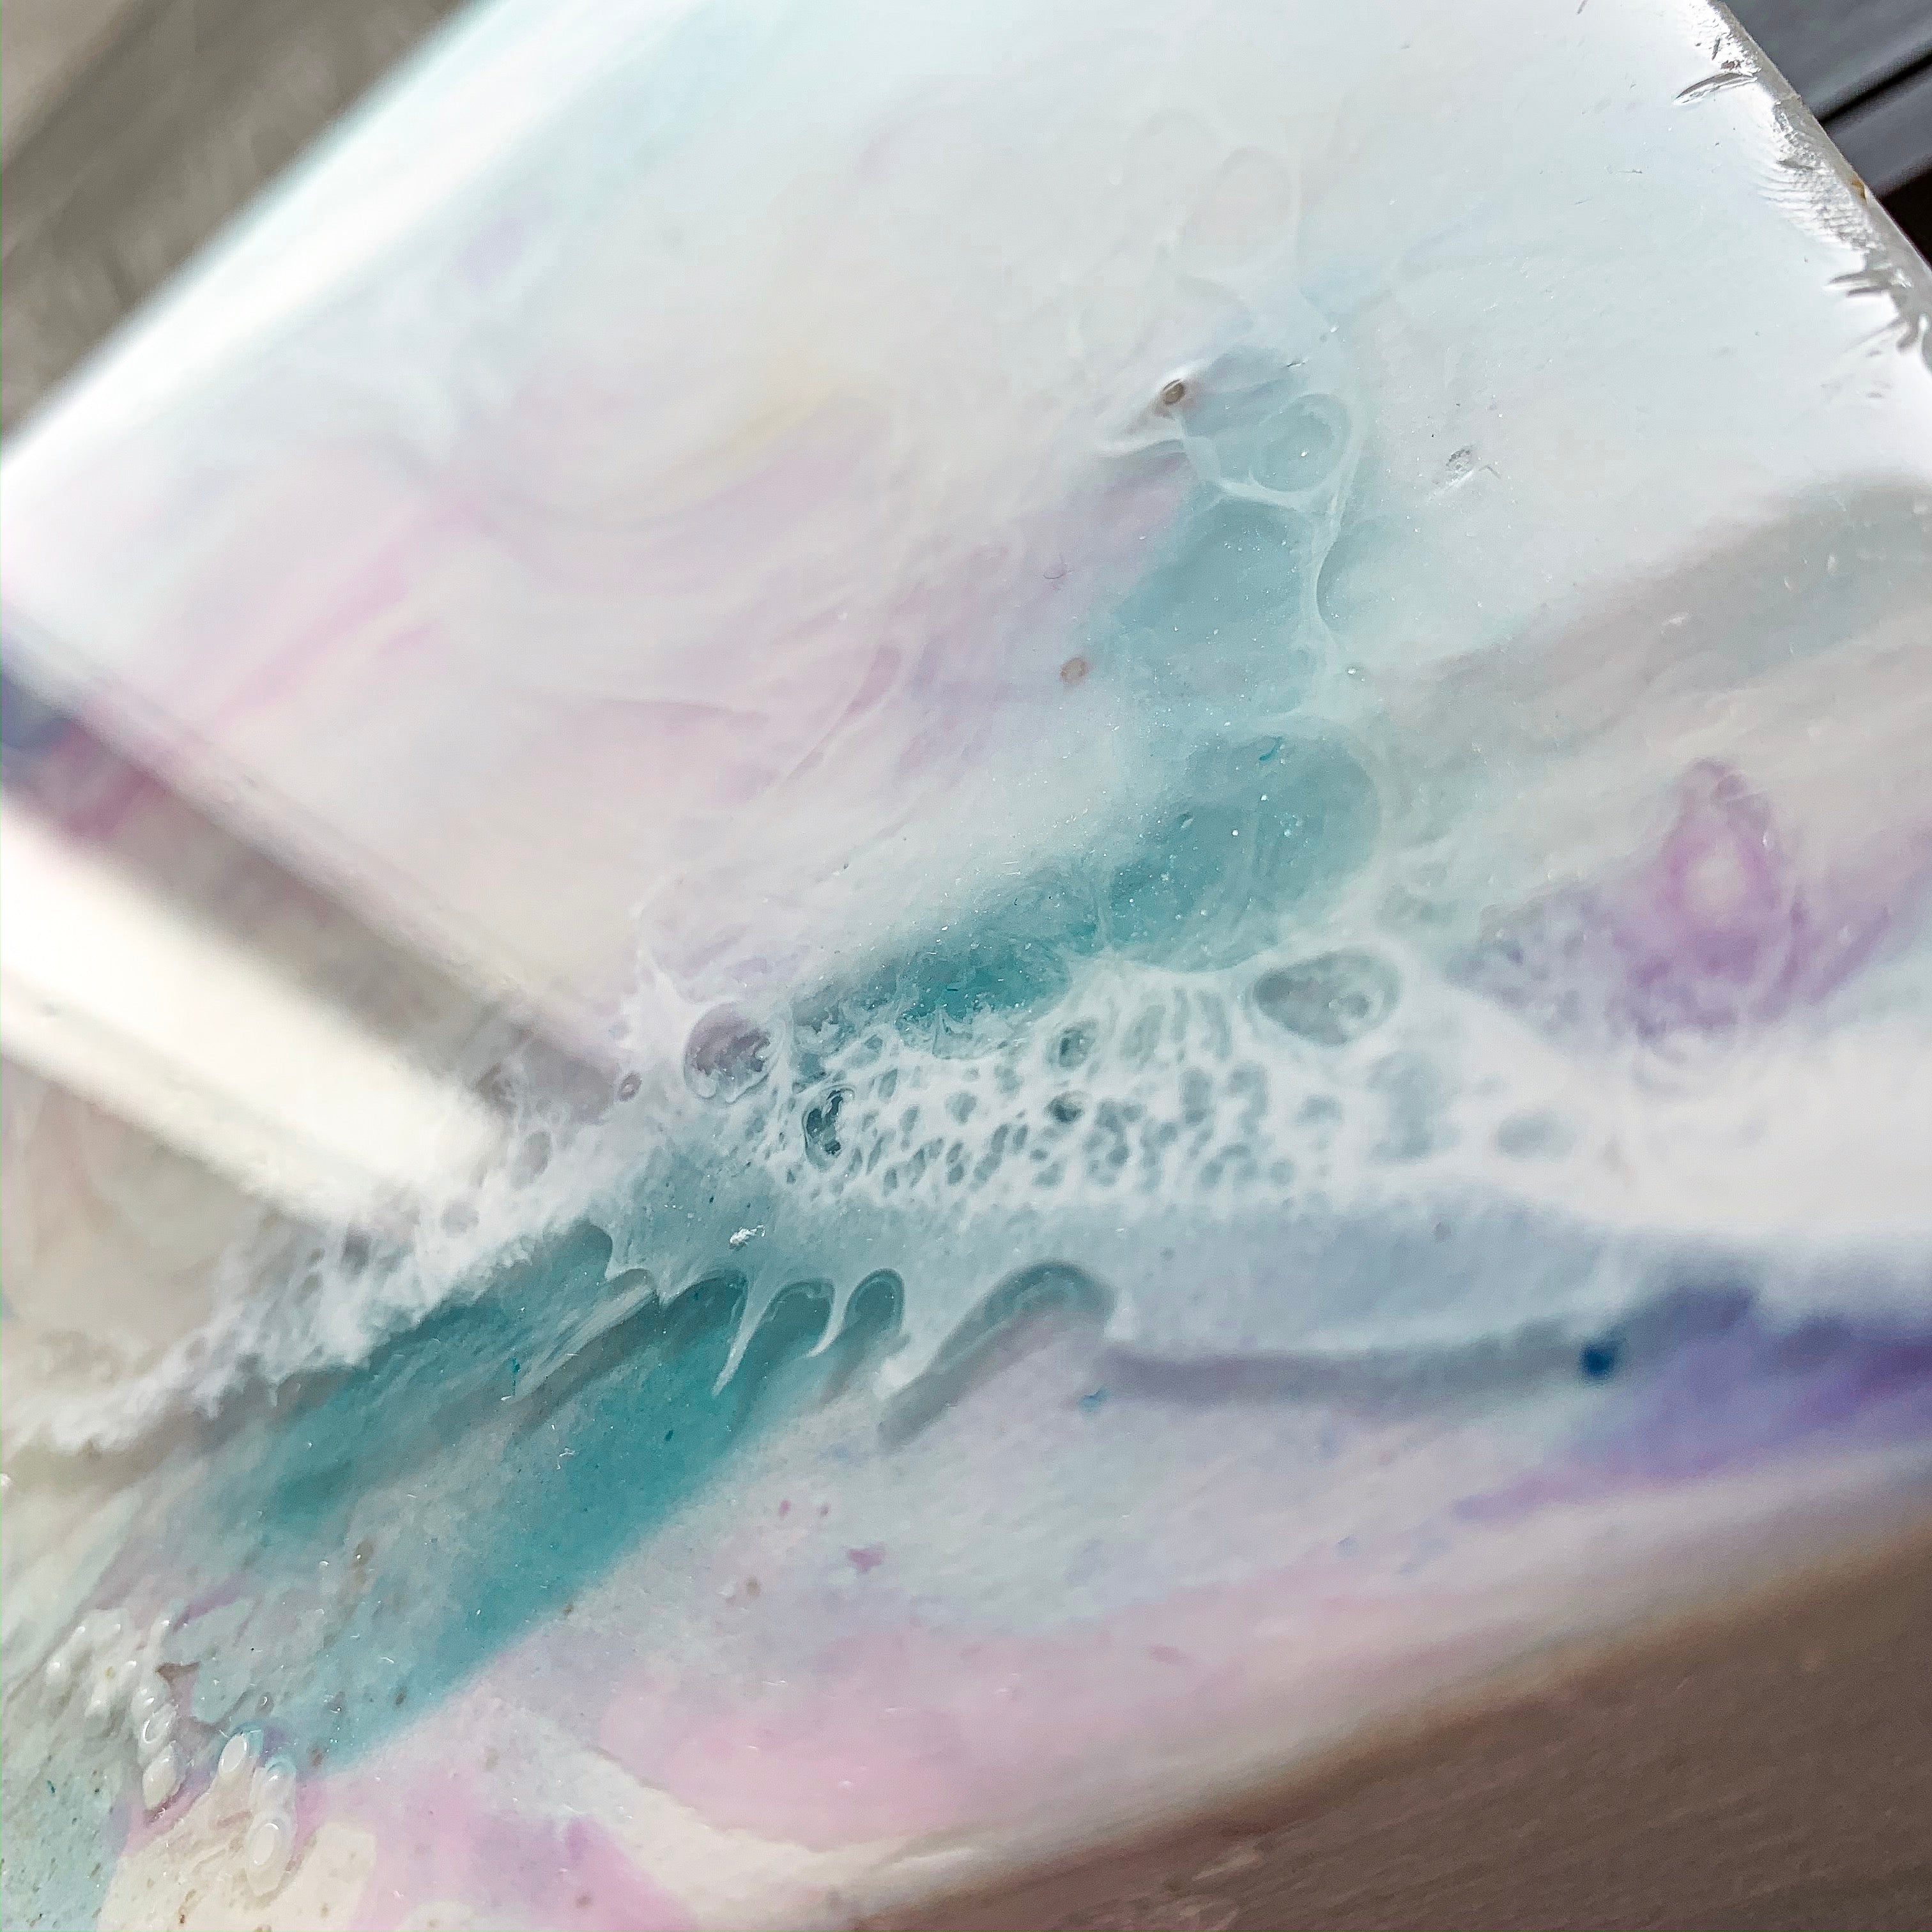 Vibrant Abstract Teal and Pink Painting With Epoxy Resin - Julia Resin Art